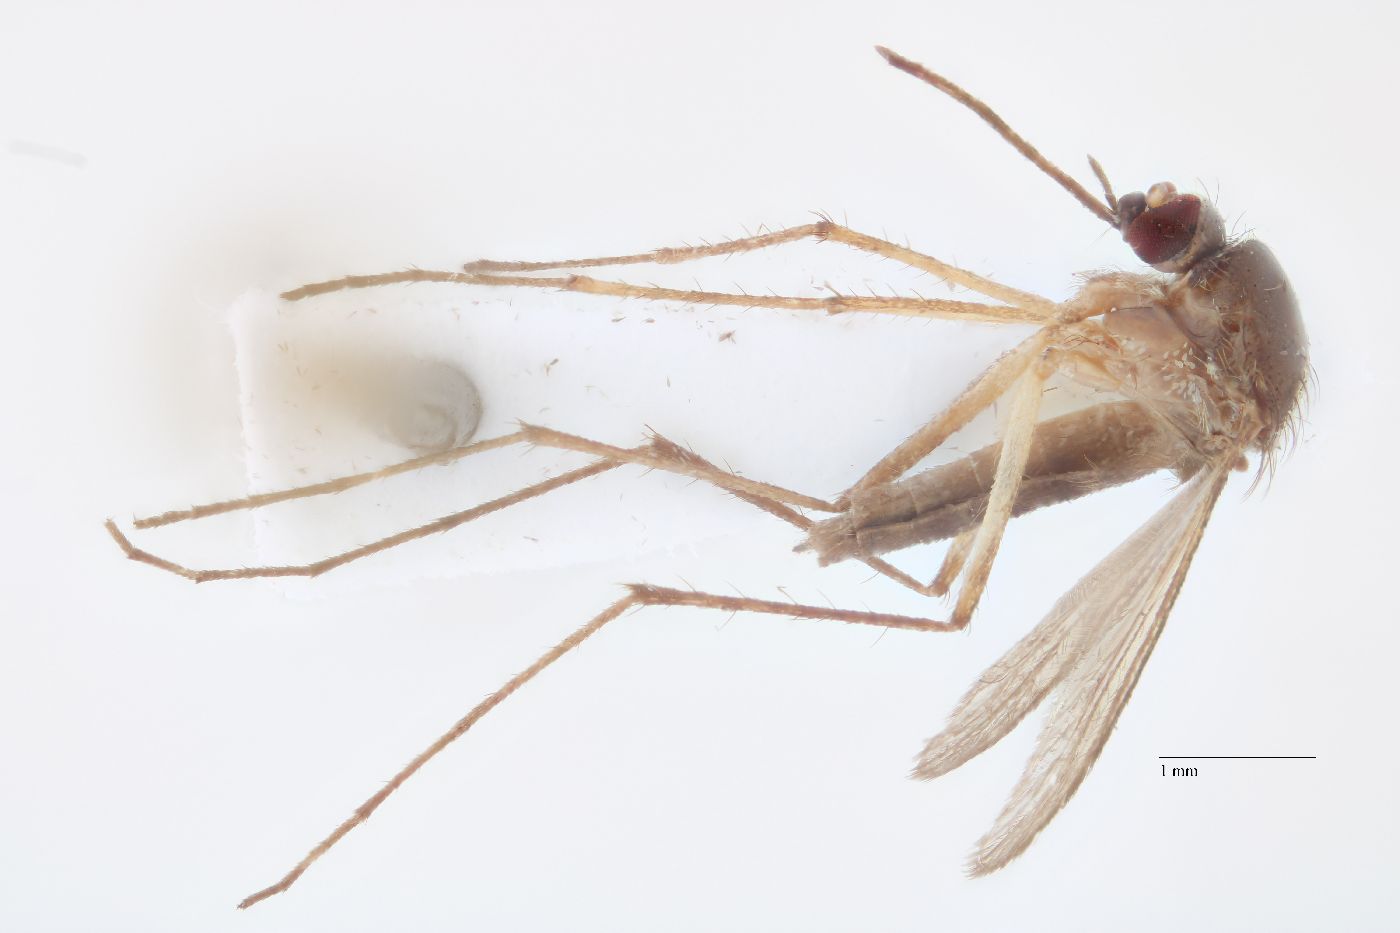 Aedes dupreei image